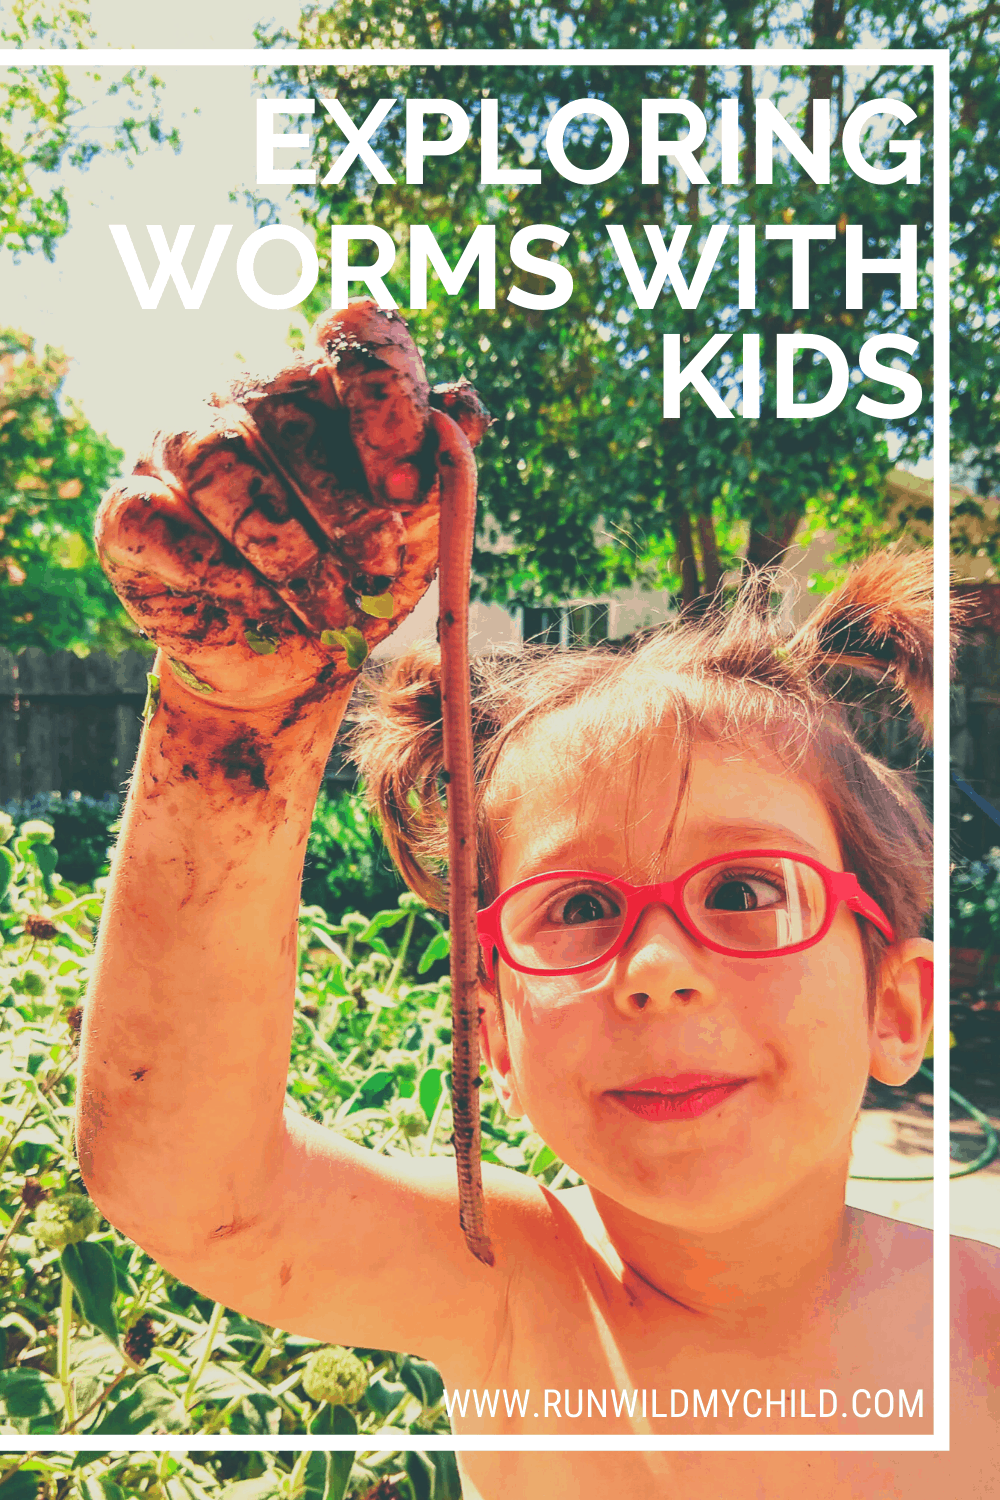 Exciting worm game that can be fun, let's play it!